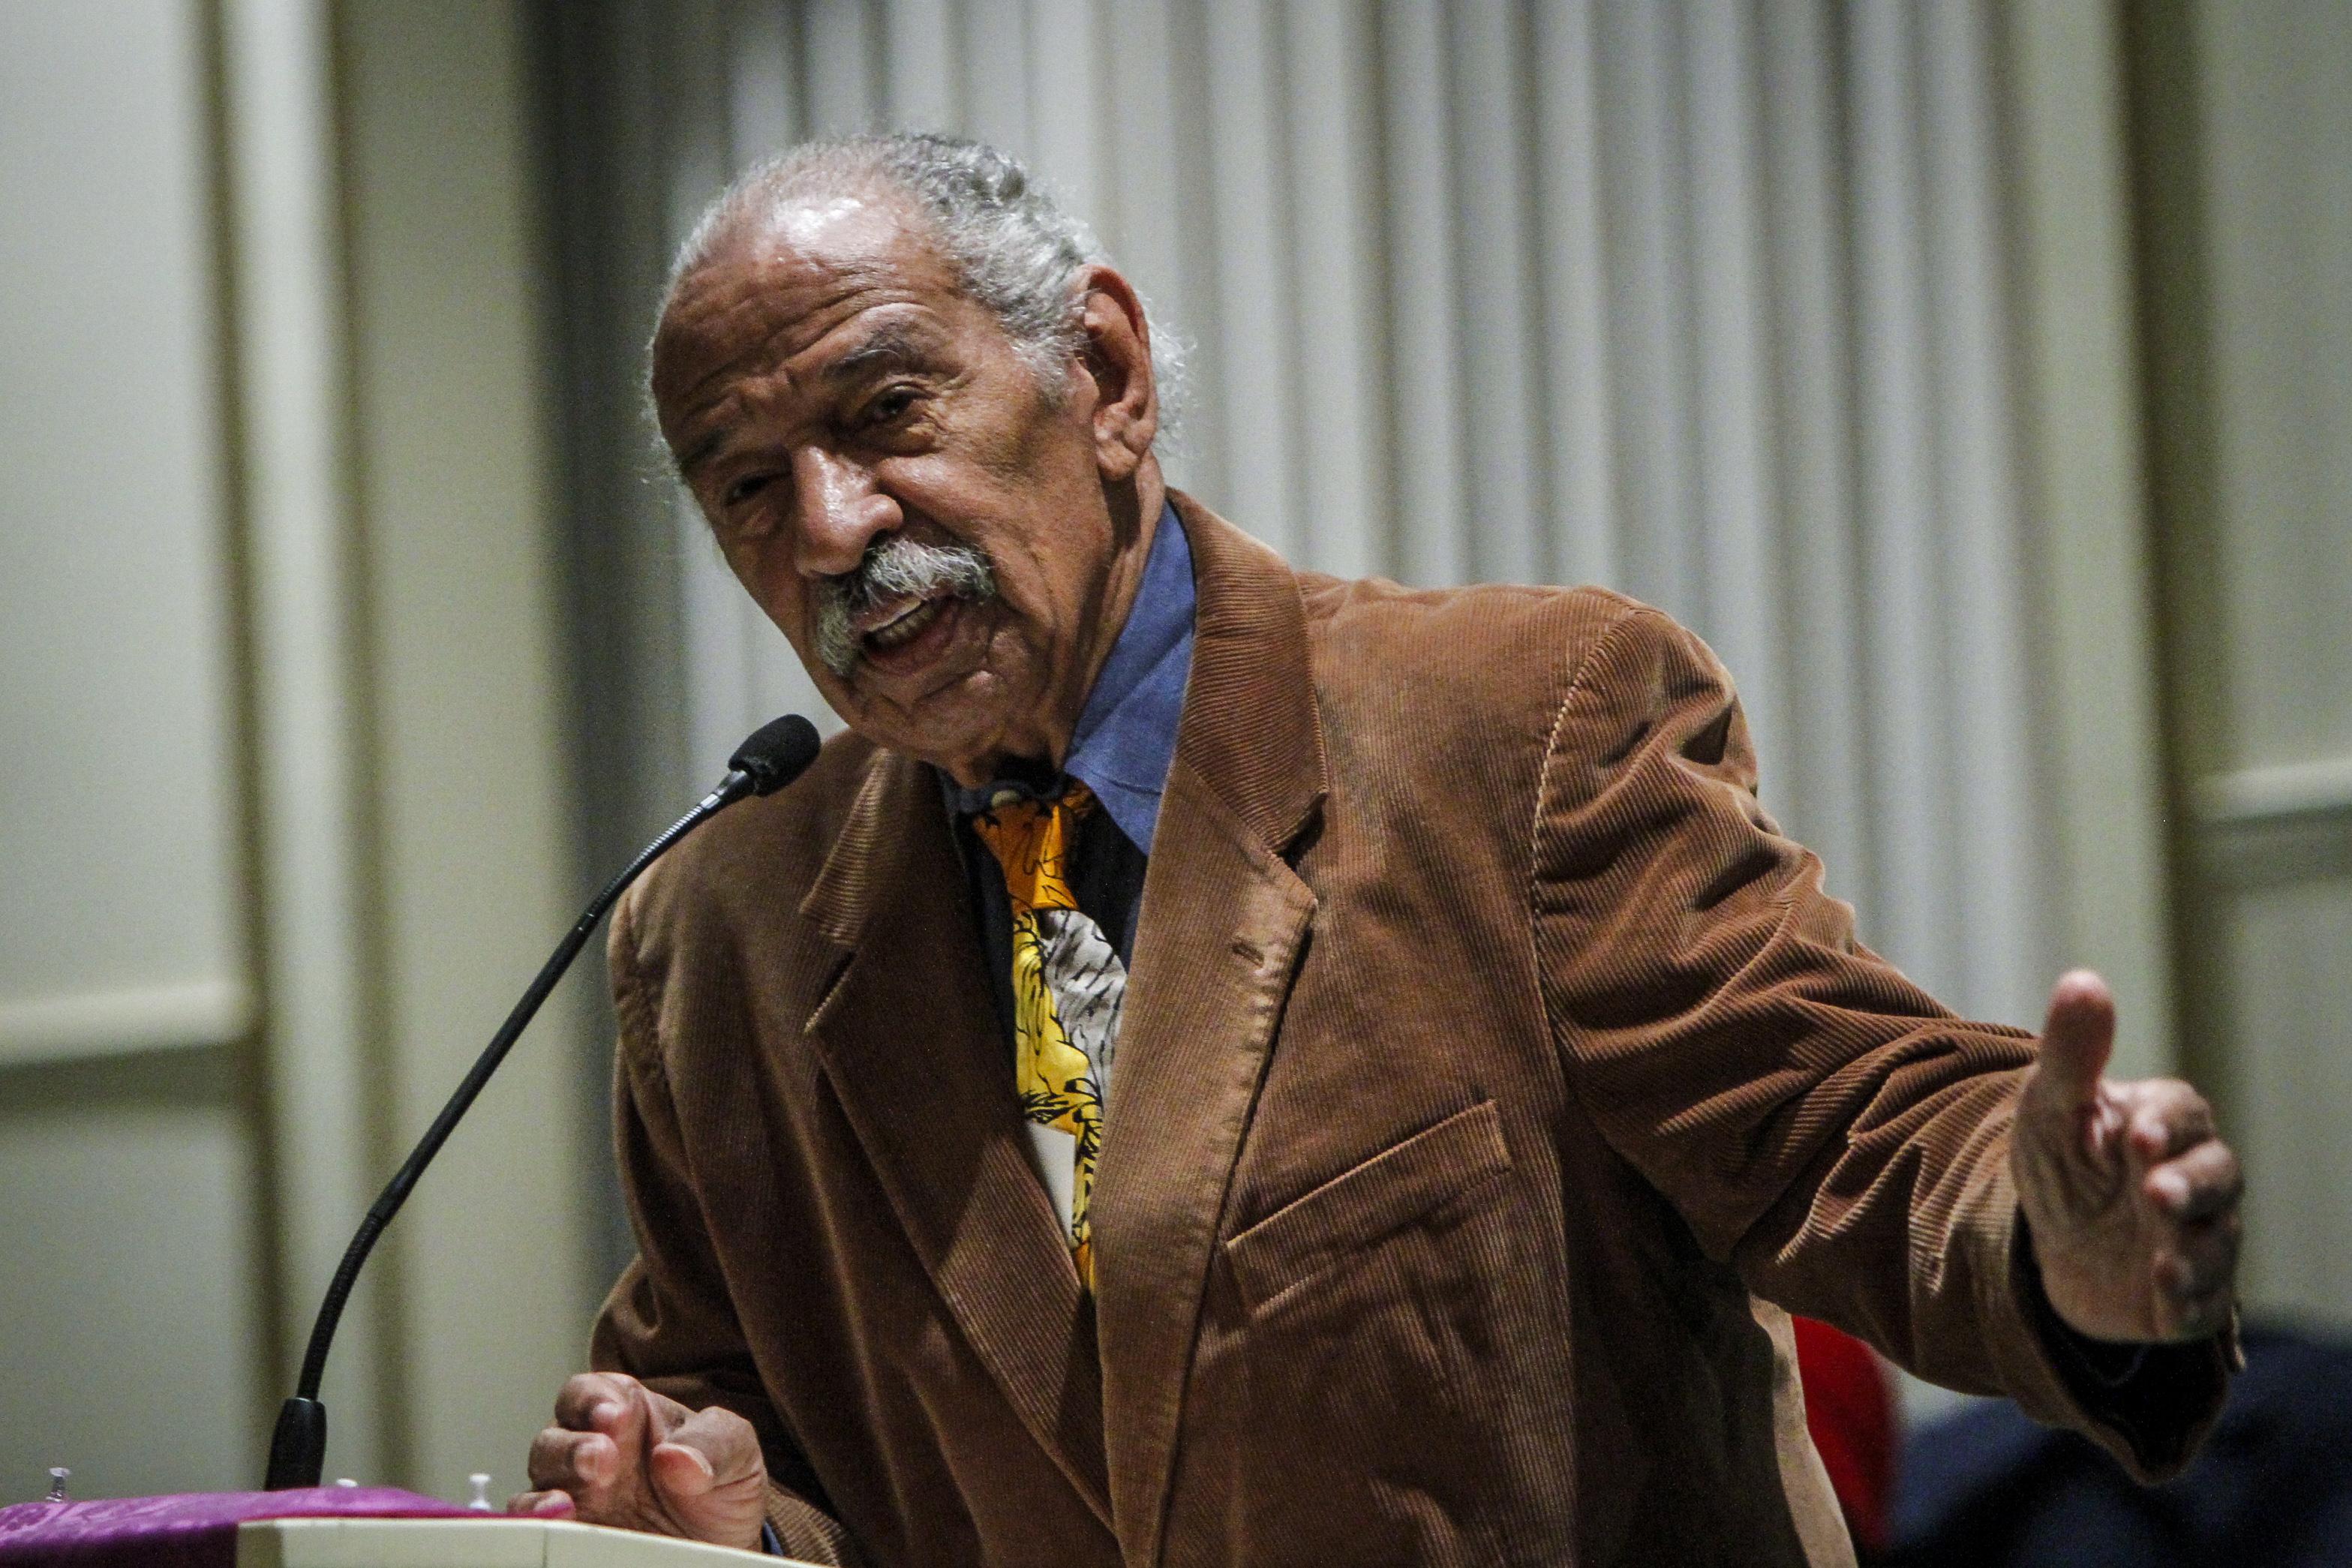 DETROIT, MI - DECEMBER 22:  U.S. Rep. John Conyers, (D-MI), speaks at a town hall meeting for Congressman Keith Ellison at the Church of the New Covenant-Baptist on December 22, 2016 in Detroit, Michigan. Ellison, a candidate to lead the Democratic National Committee, spoke at the church where his brother Brian is a pastor.  (Photo by Sarah Rice/Getty Images)